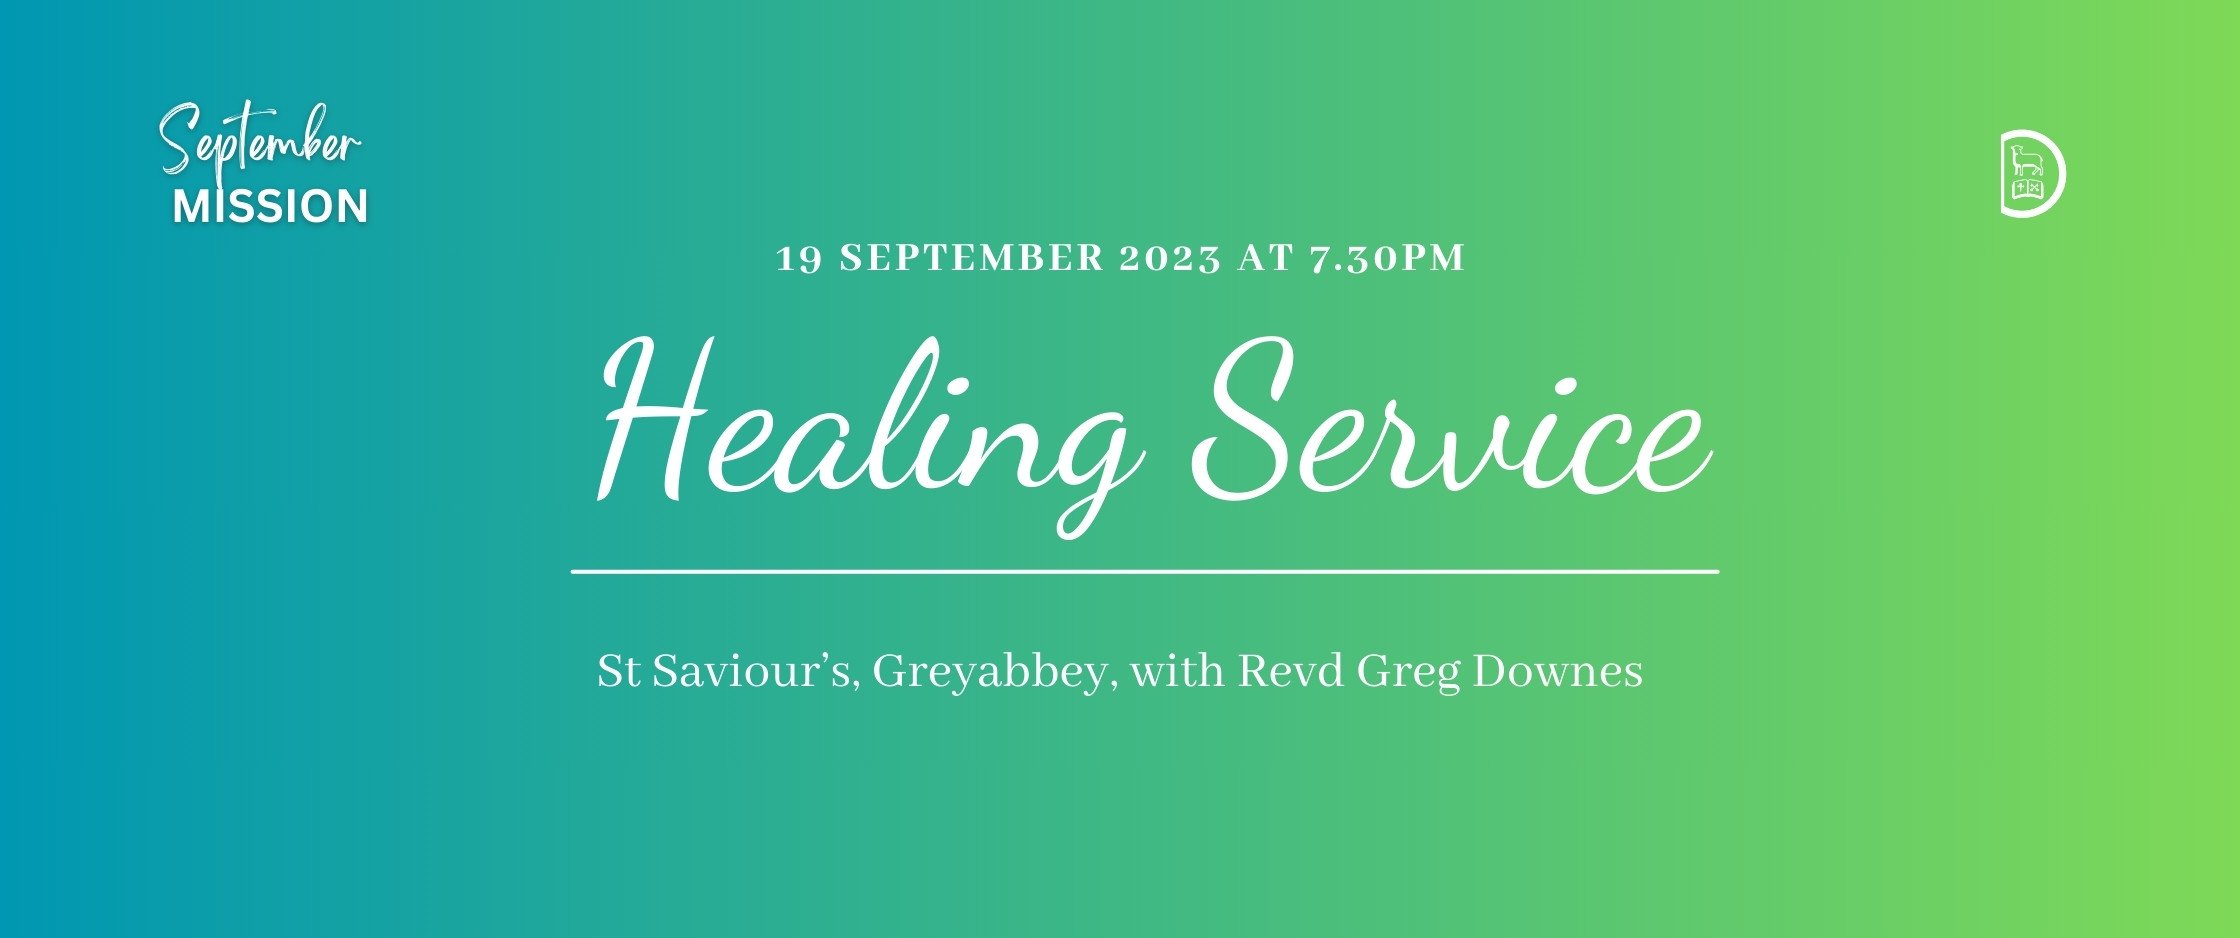 Healing Service on Tuesday evening